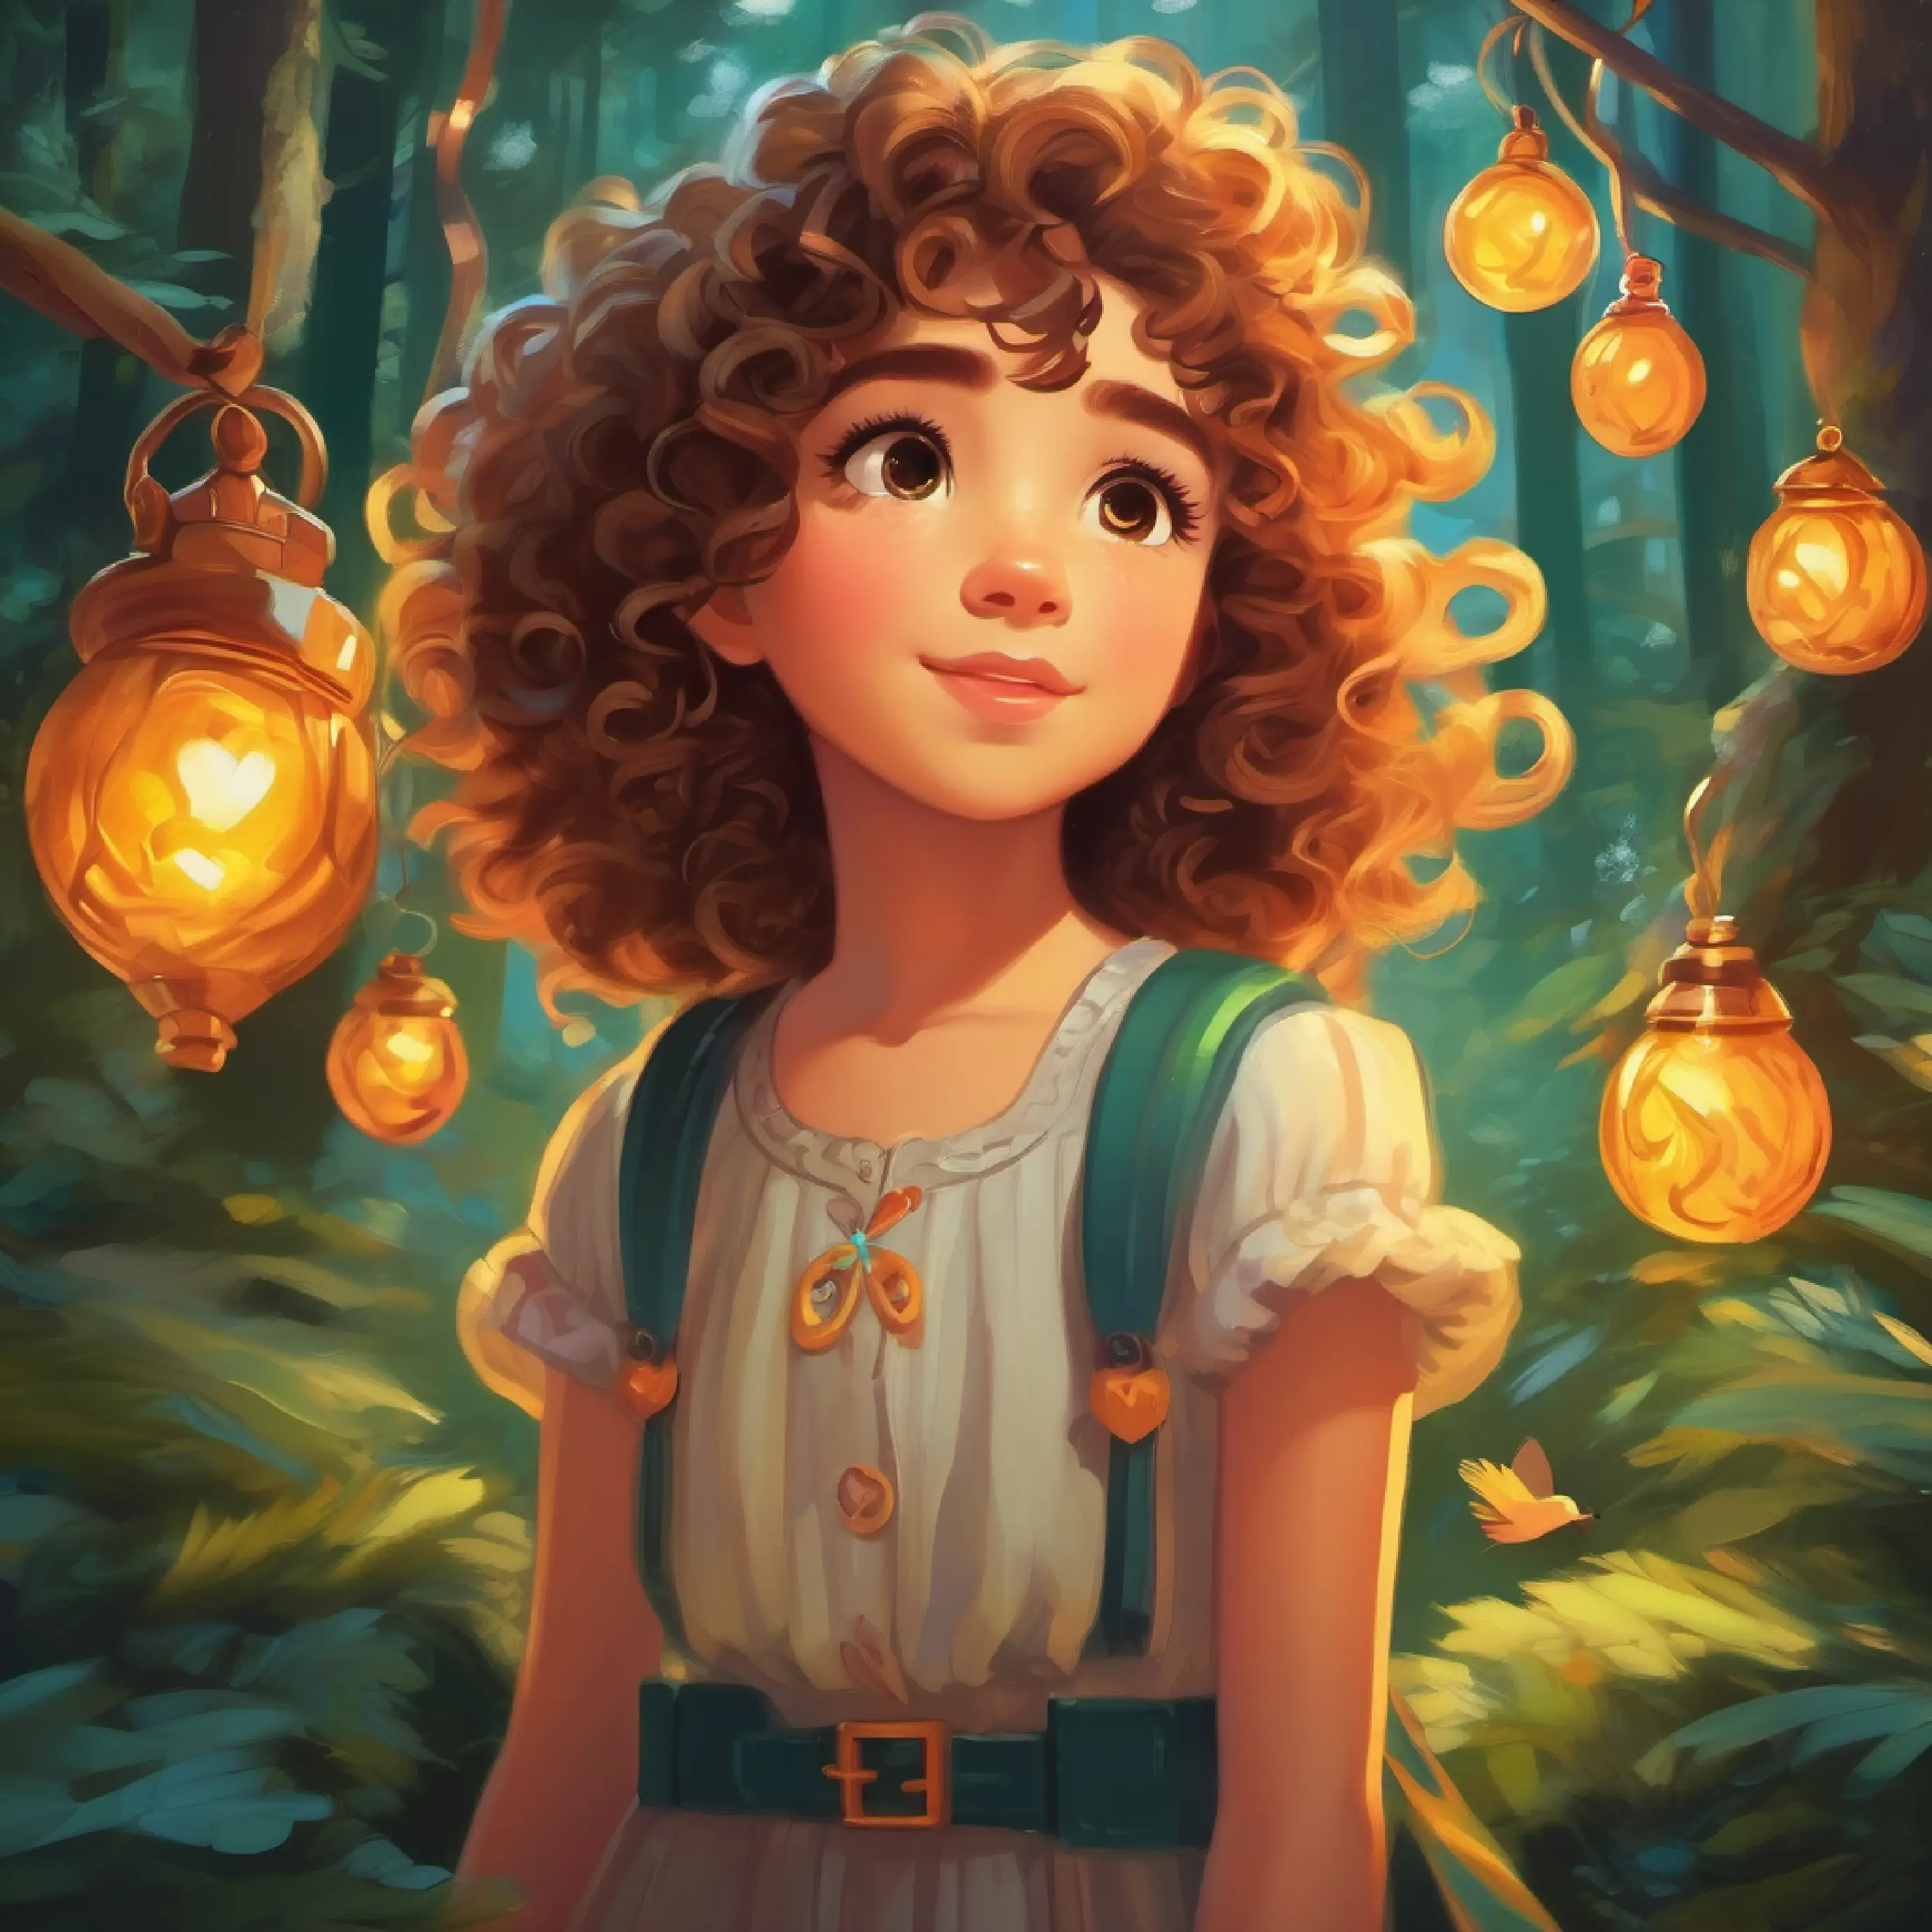 Curly-haired girl with amber eyes, spirited and dreamy's friends anxiously wait for her dream set in a talking forest.